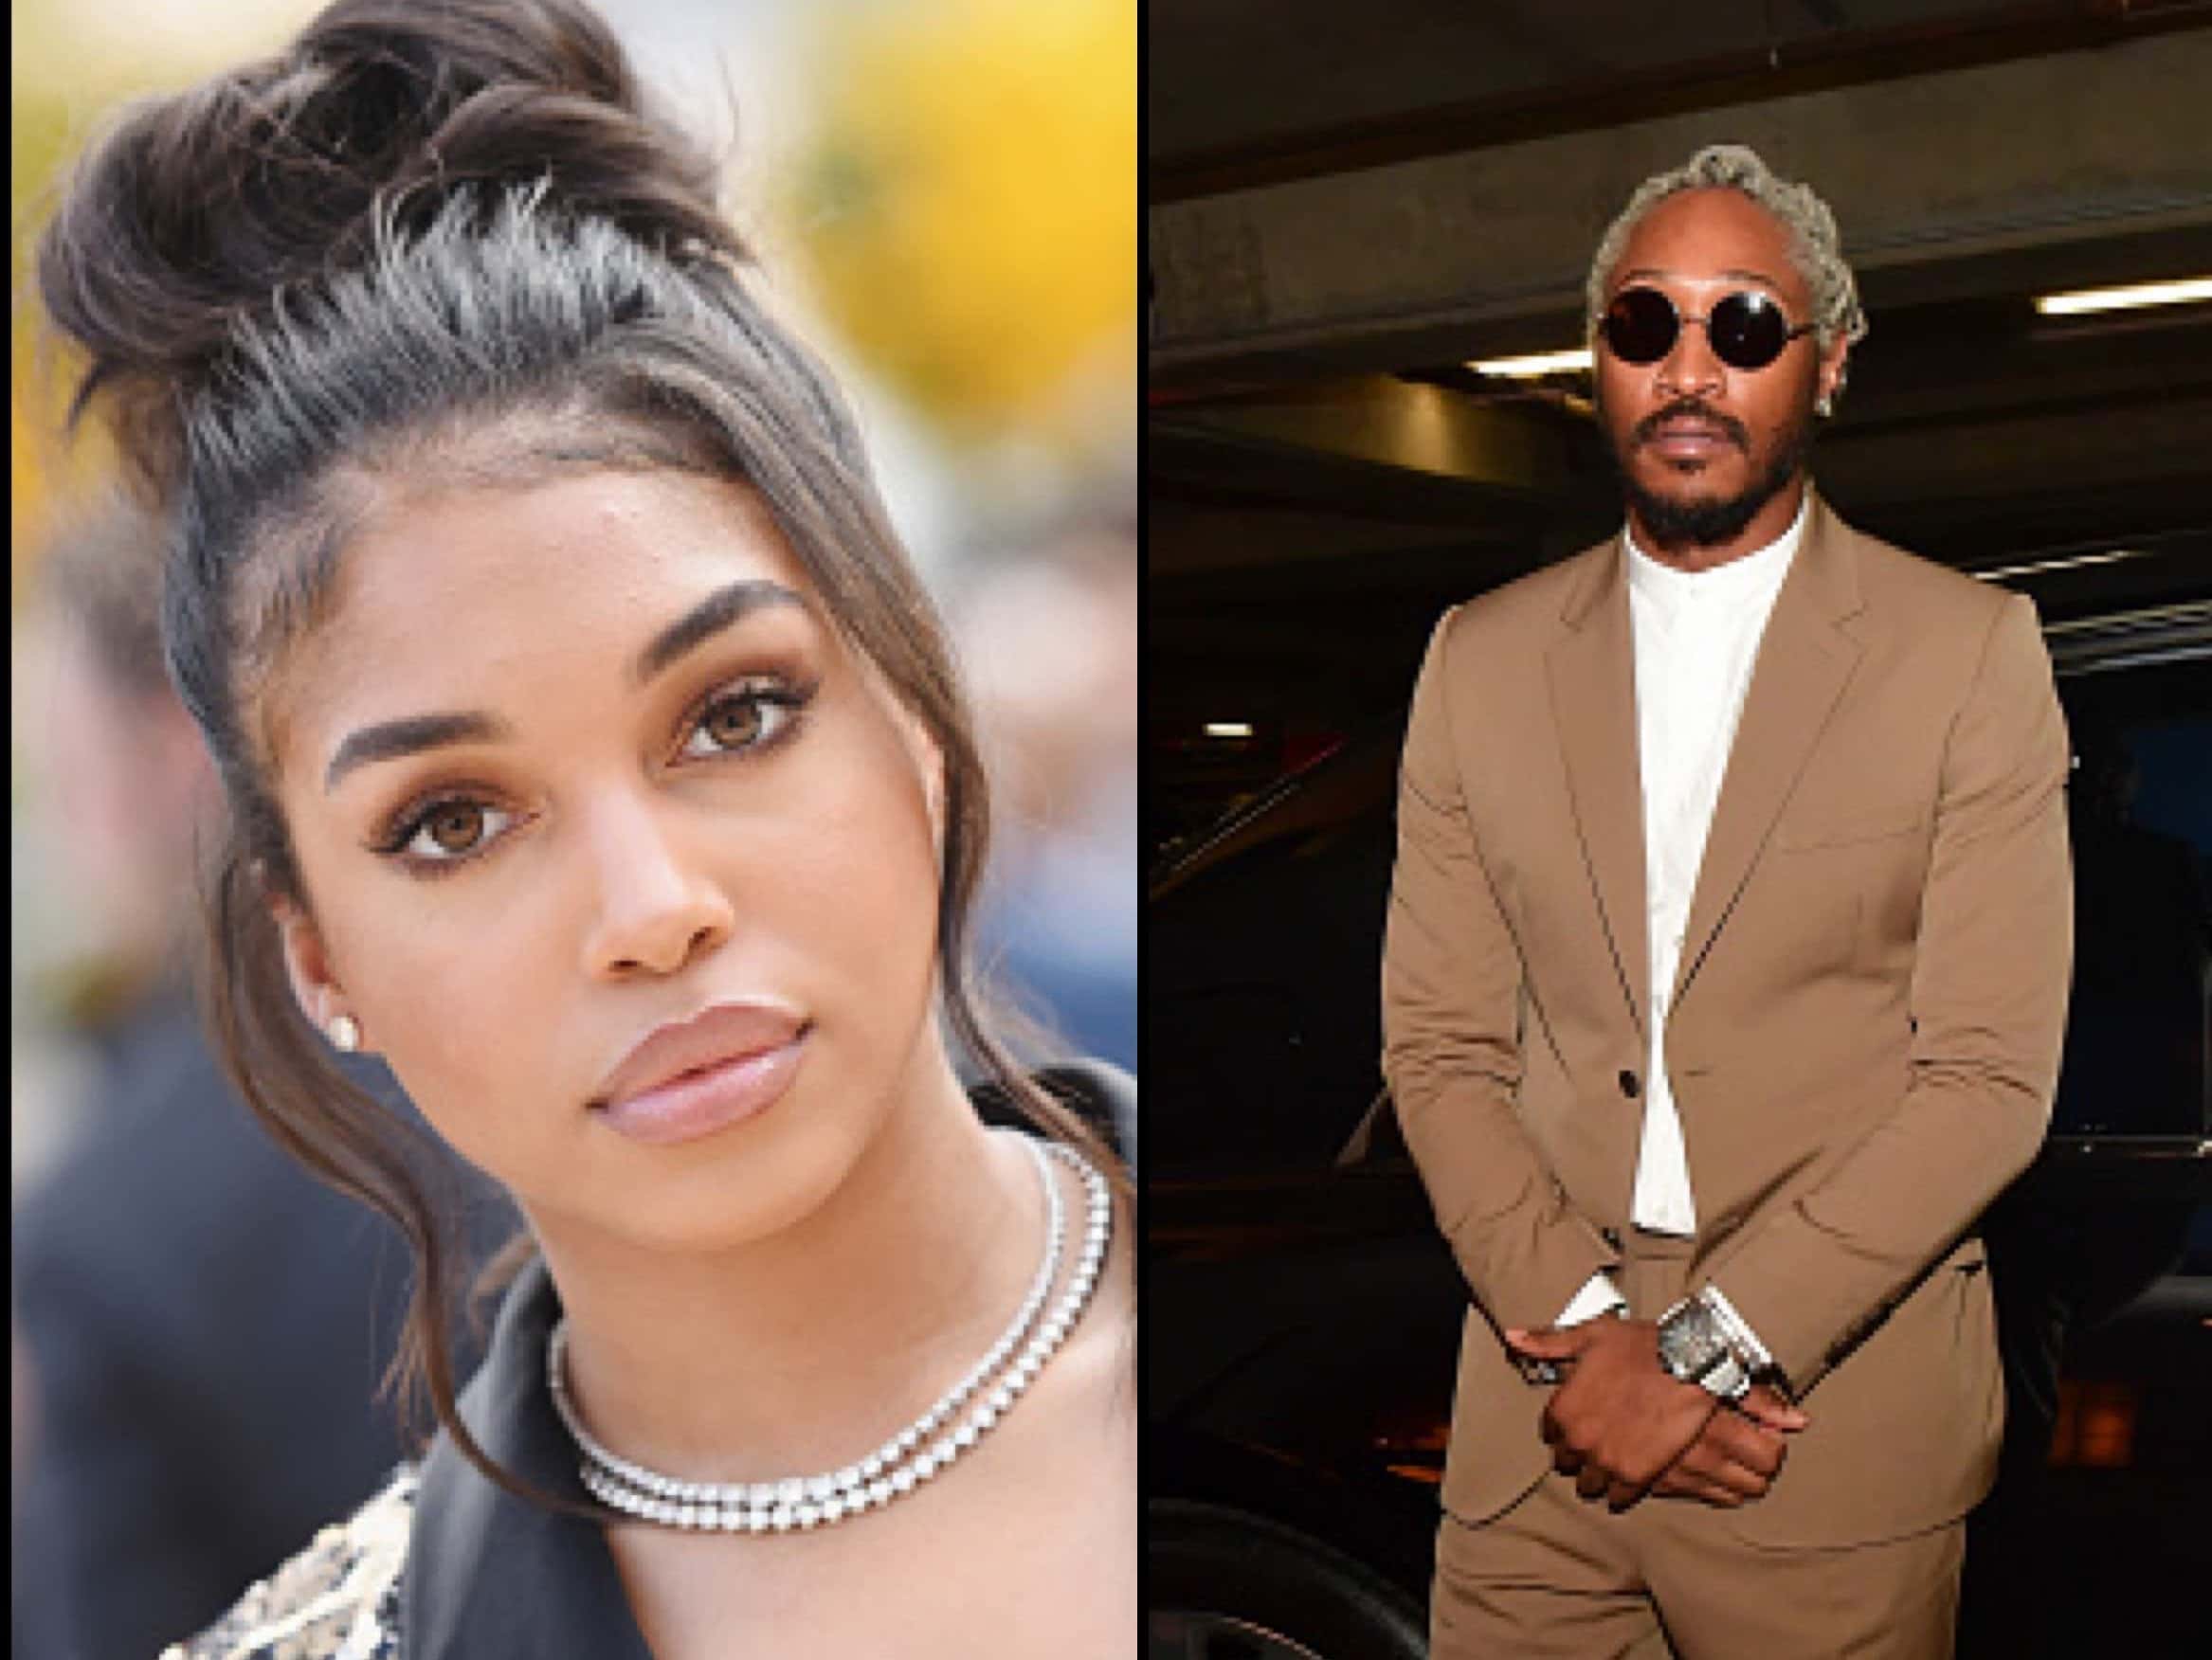 Lori Harvey Is Unbothered While Future Tweets Cryptic Messages About Baby Mama Hot97 lori harvey is unbothered while future